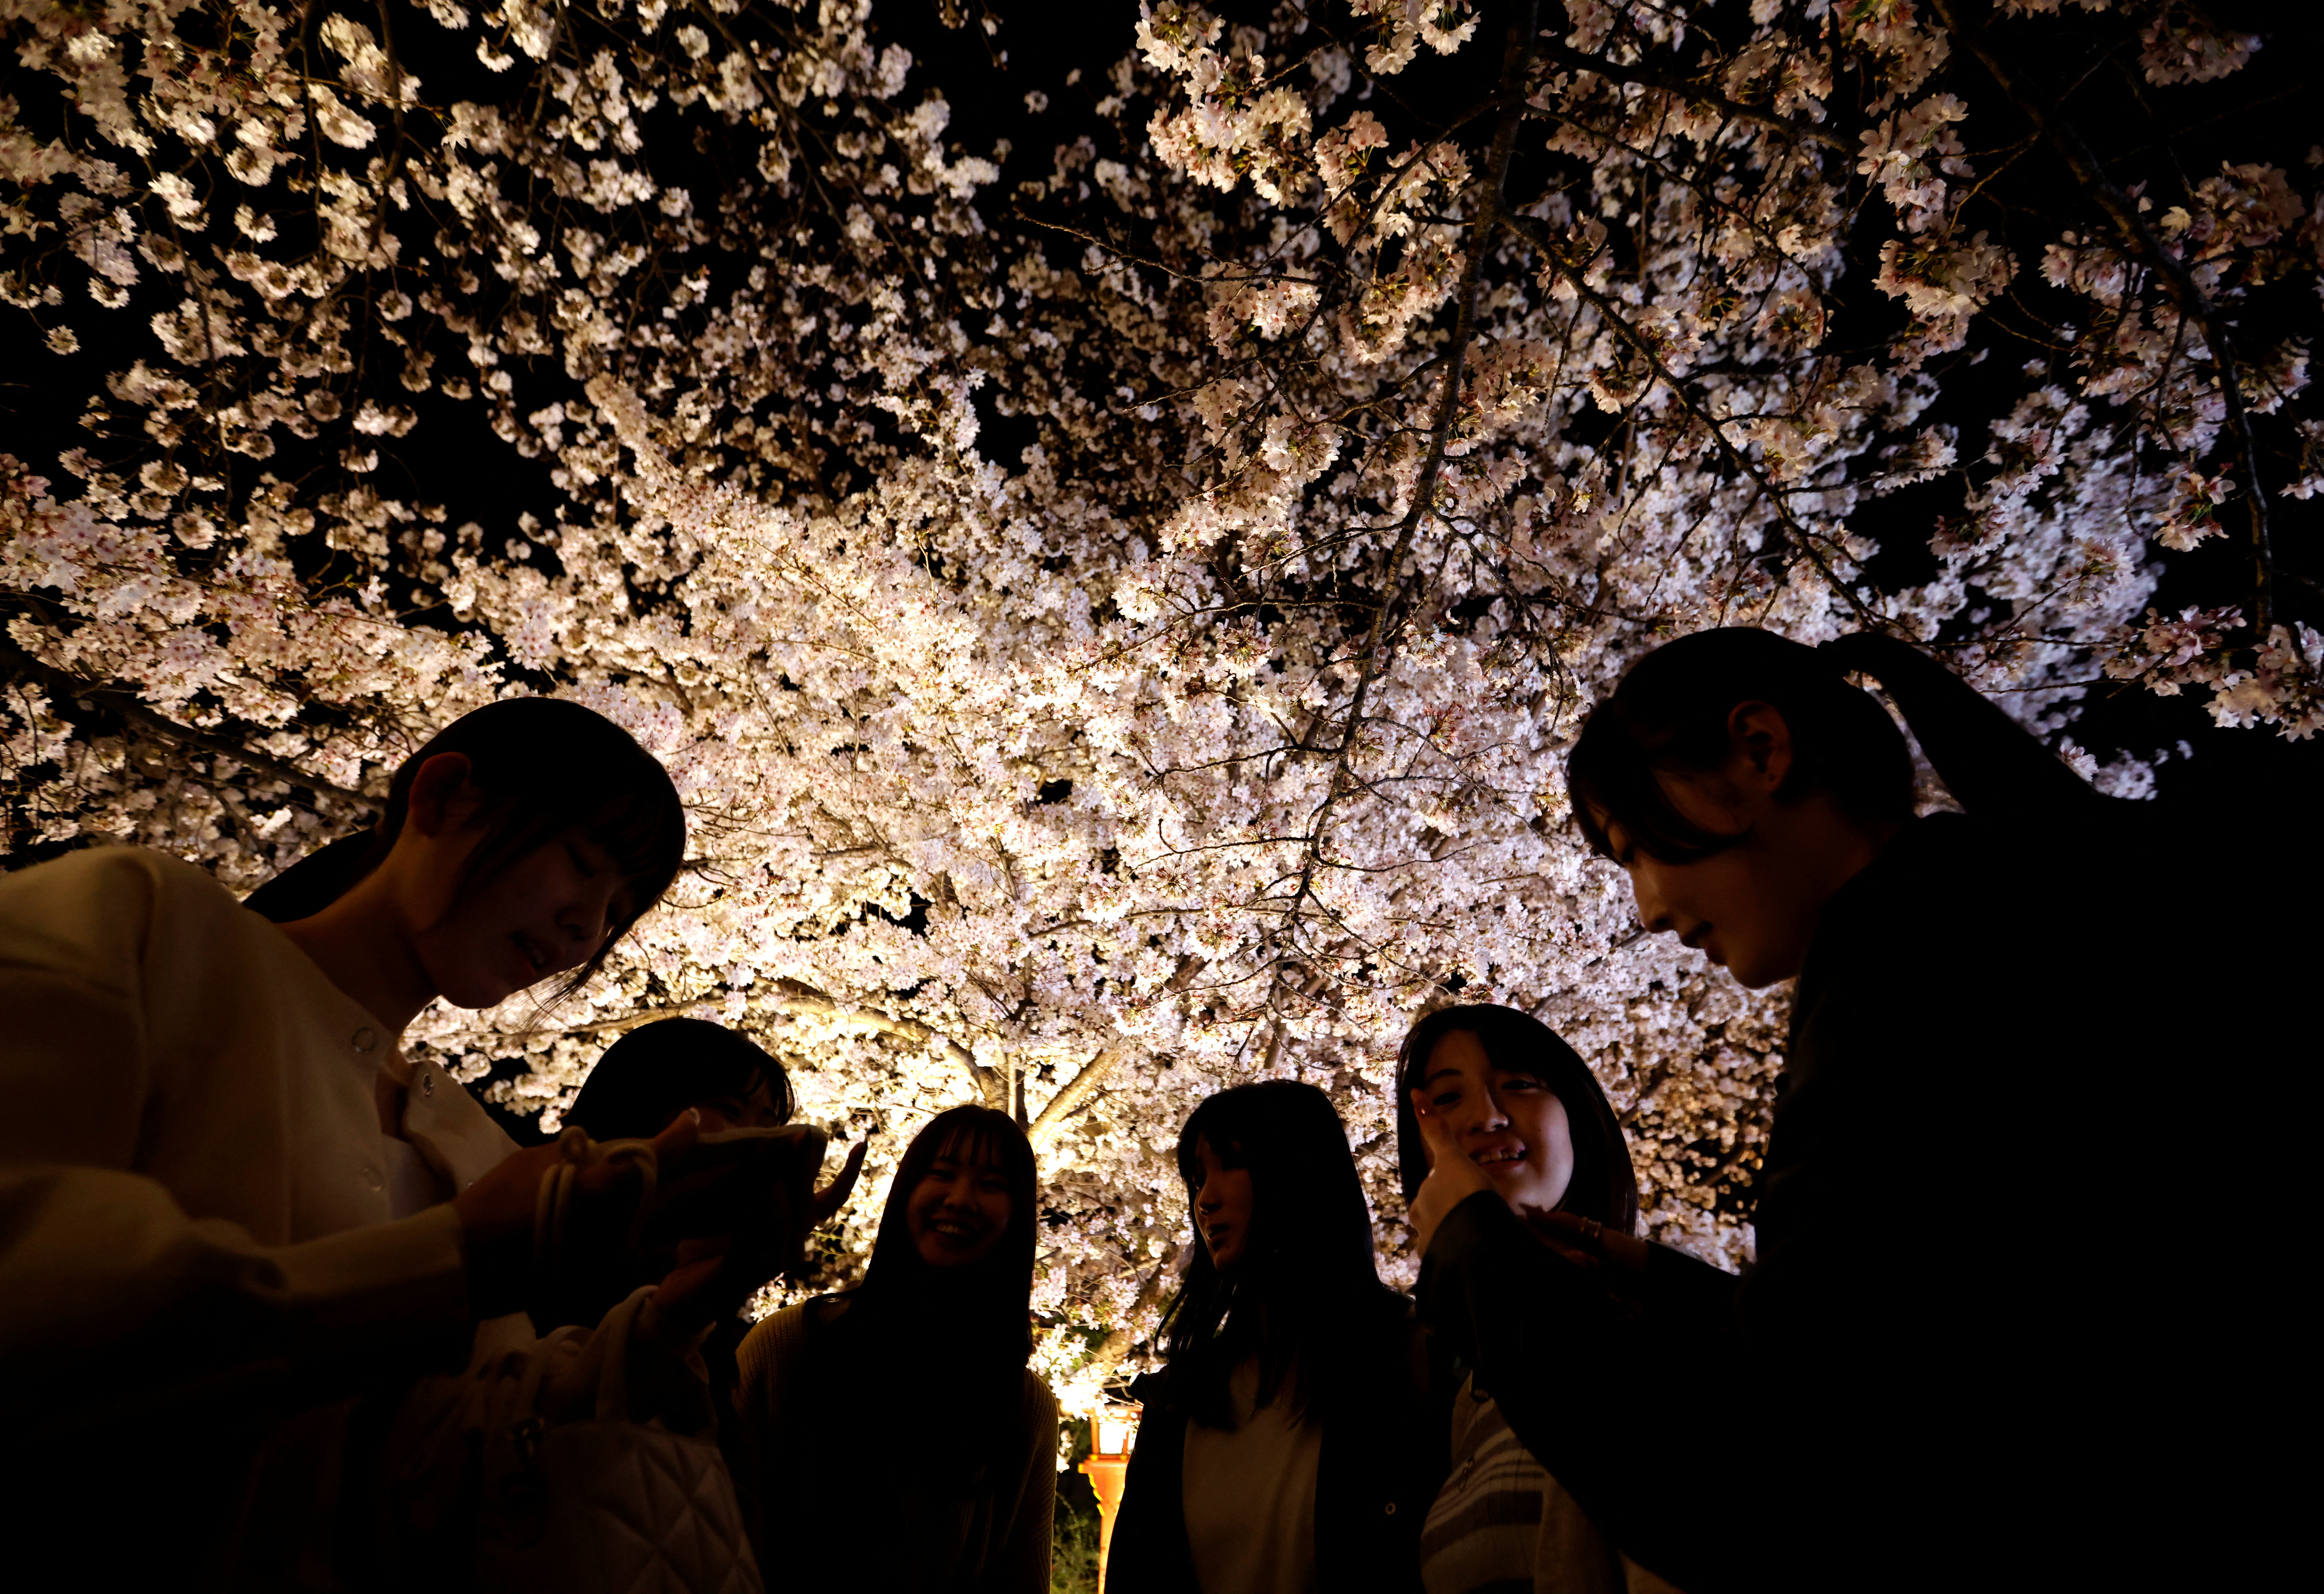 Tourists prepare to take a picture under illuminated blooming cherry blossoms at Gion district in Kyoto